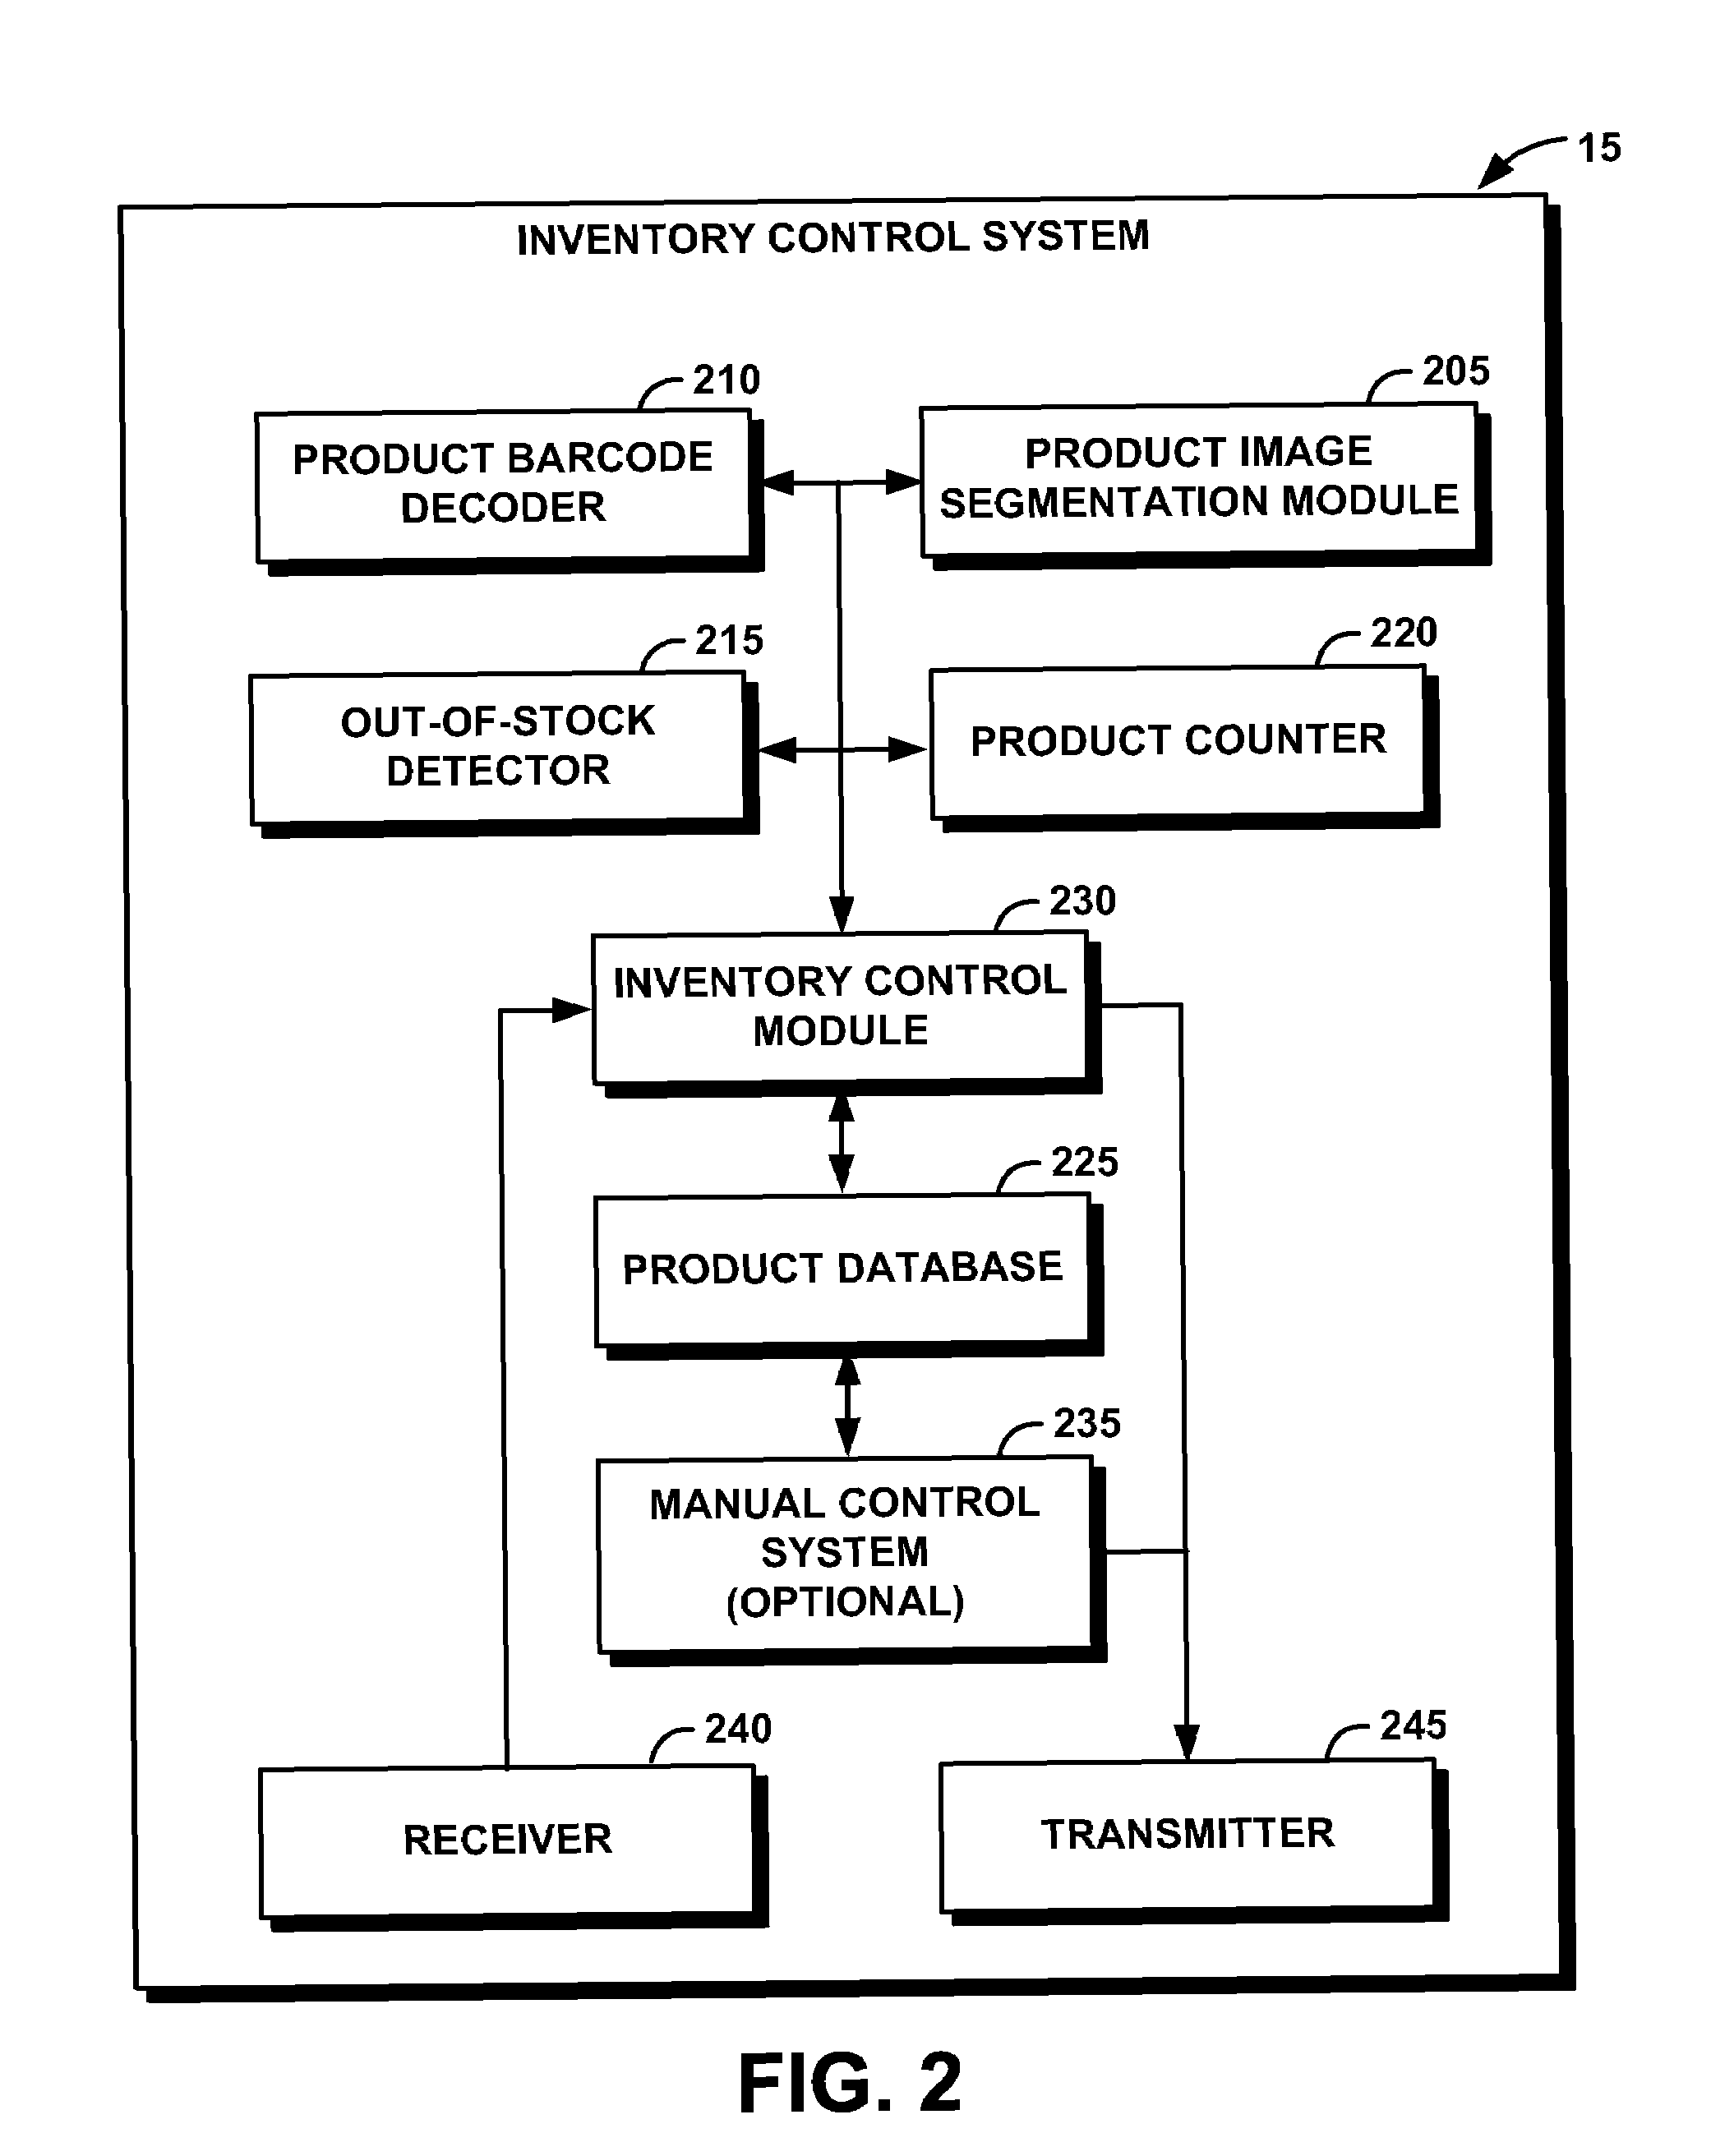 System and method for performing inventory using a mobile inventory robot